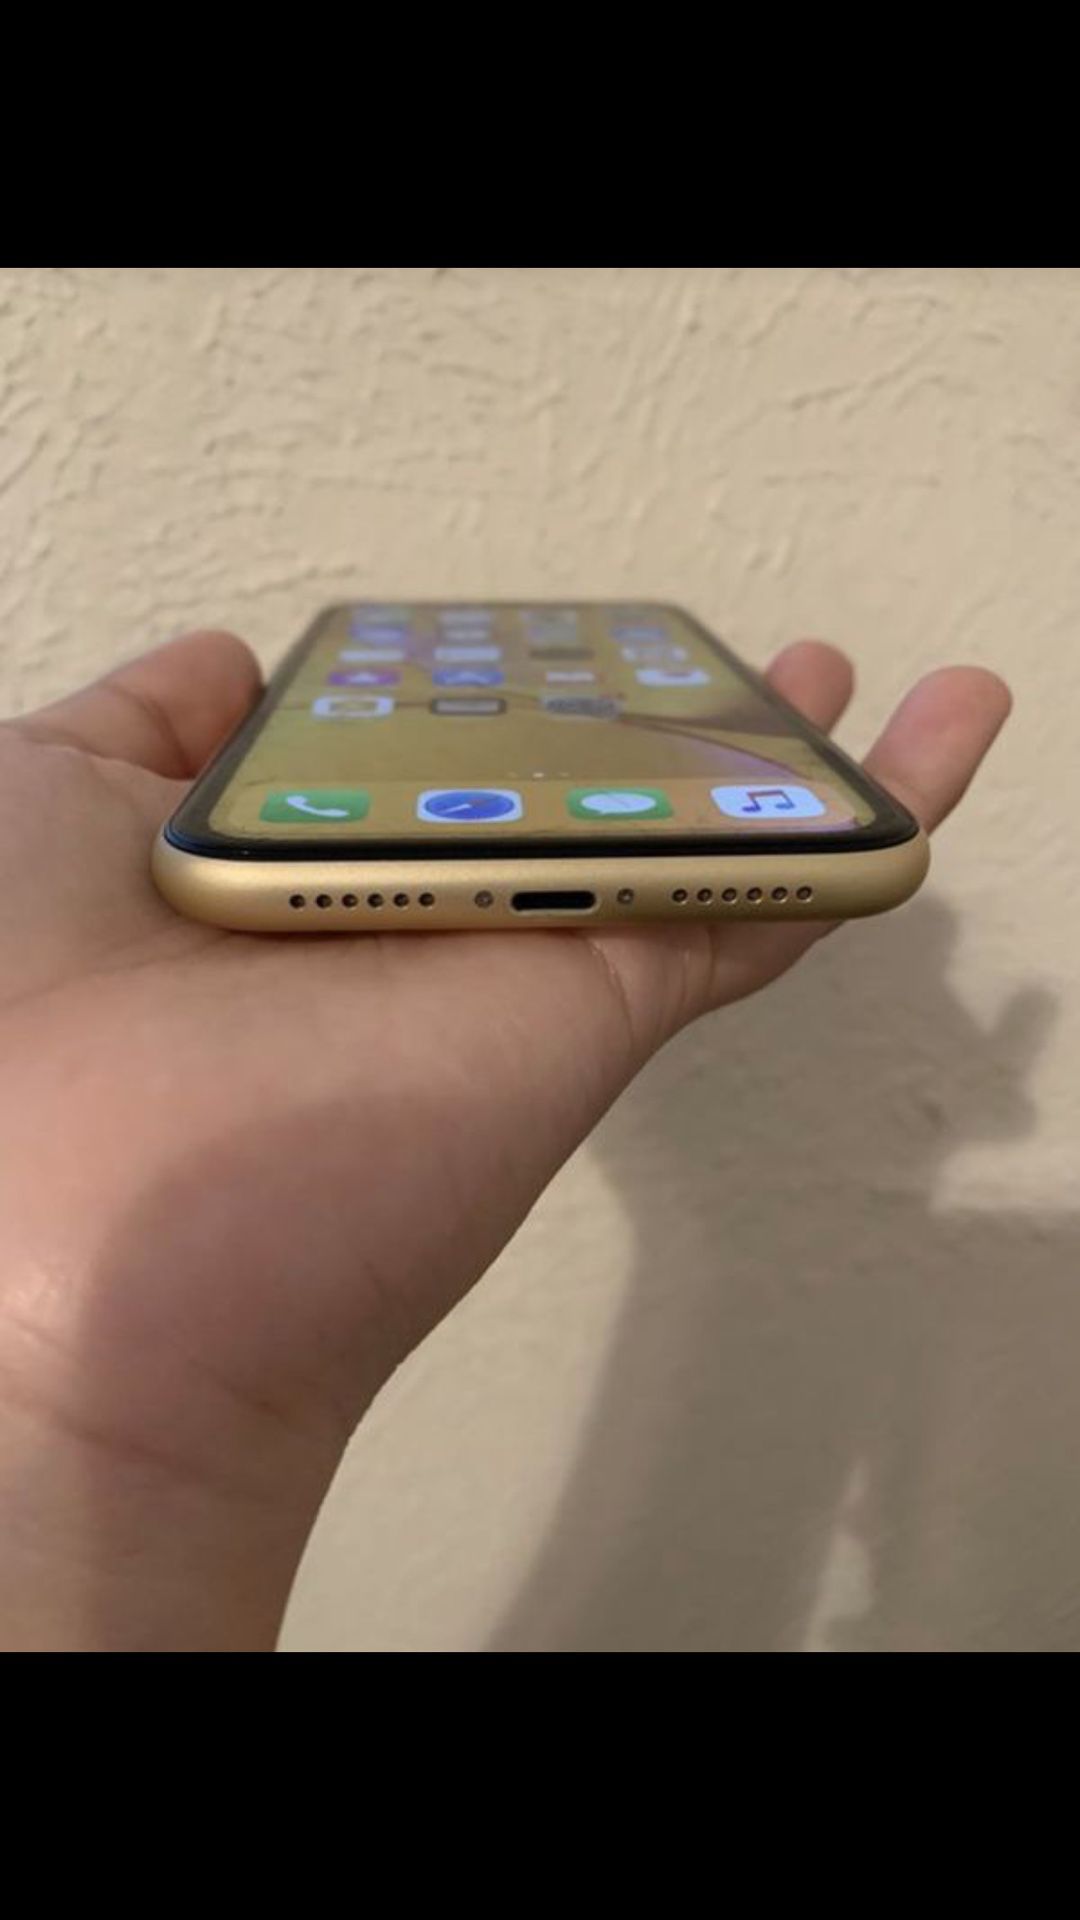 iPhone XR: Sprint/Boost Carriers